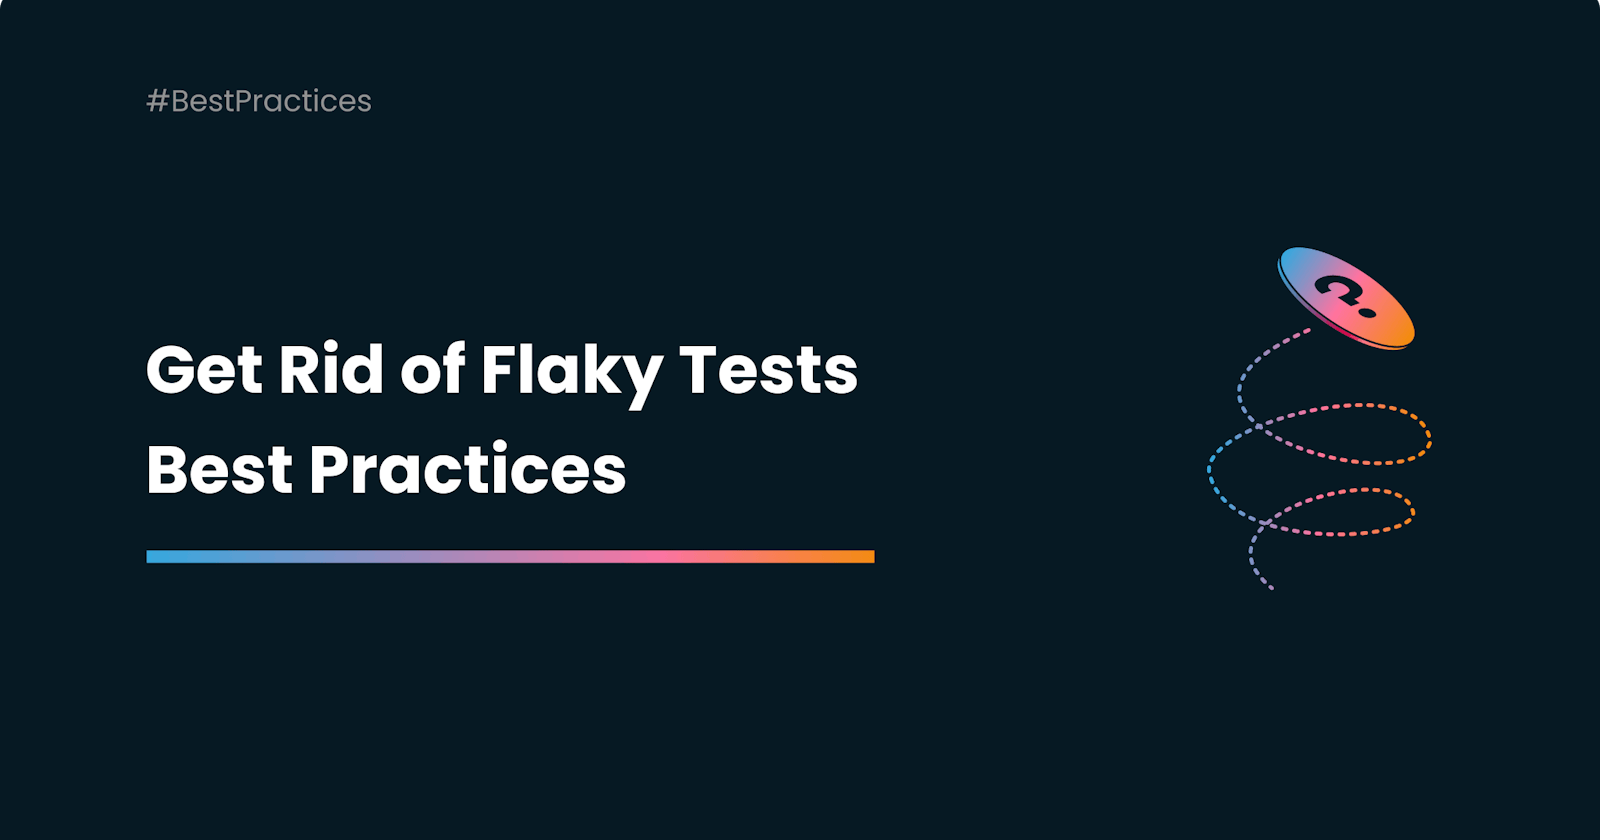 How to Get Rid of Flaky Tests? Best Practices